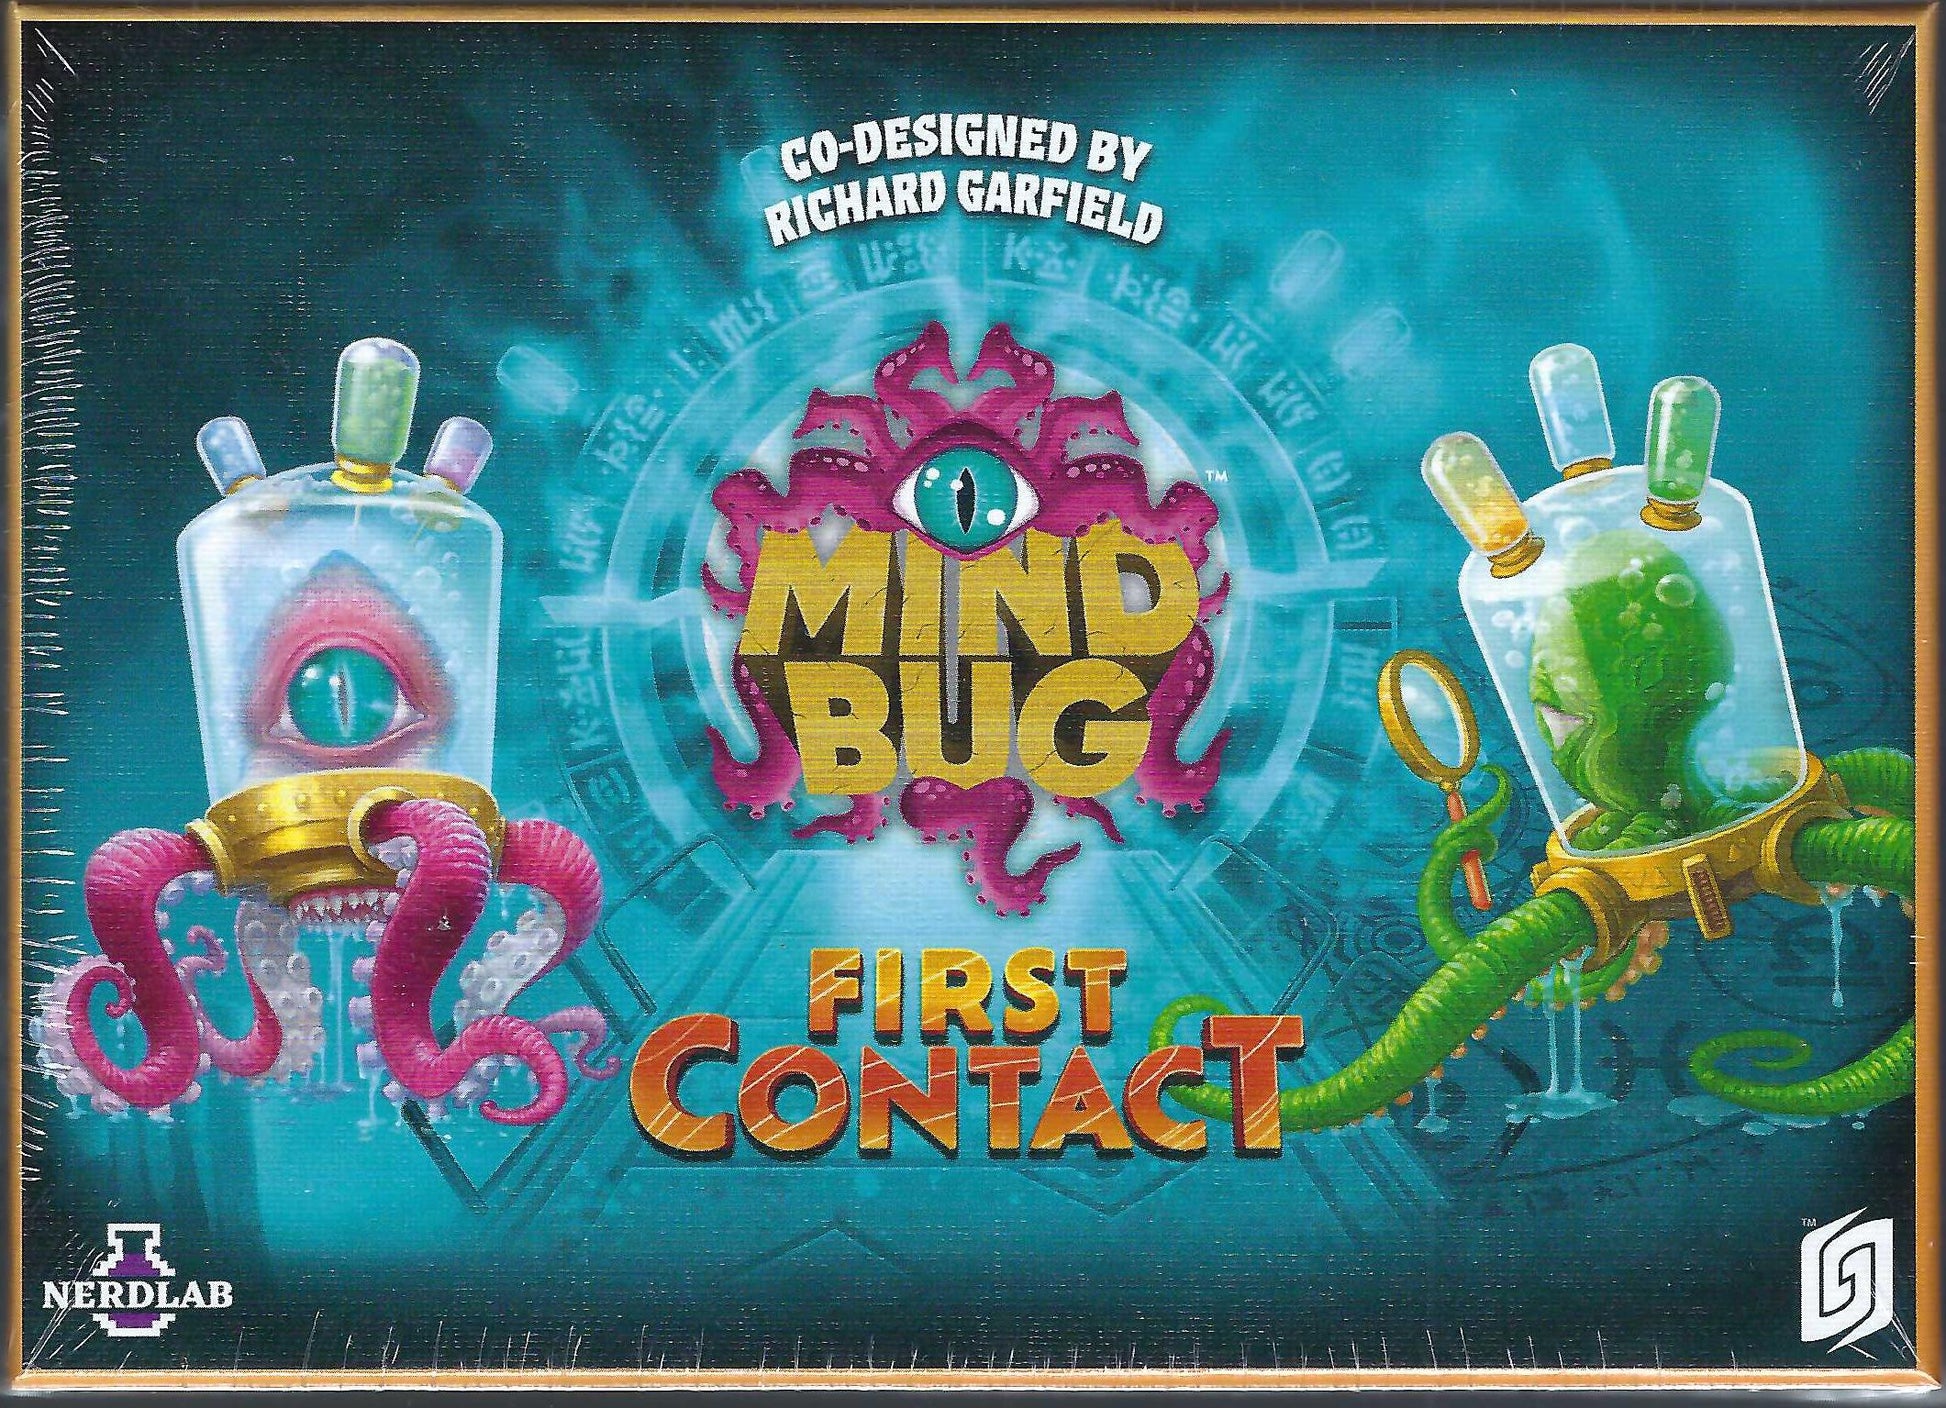 Mindbug First Contact box cover